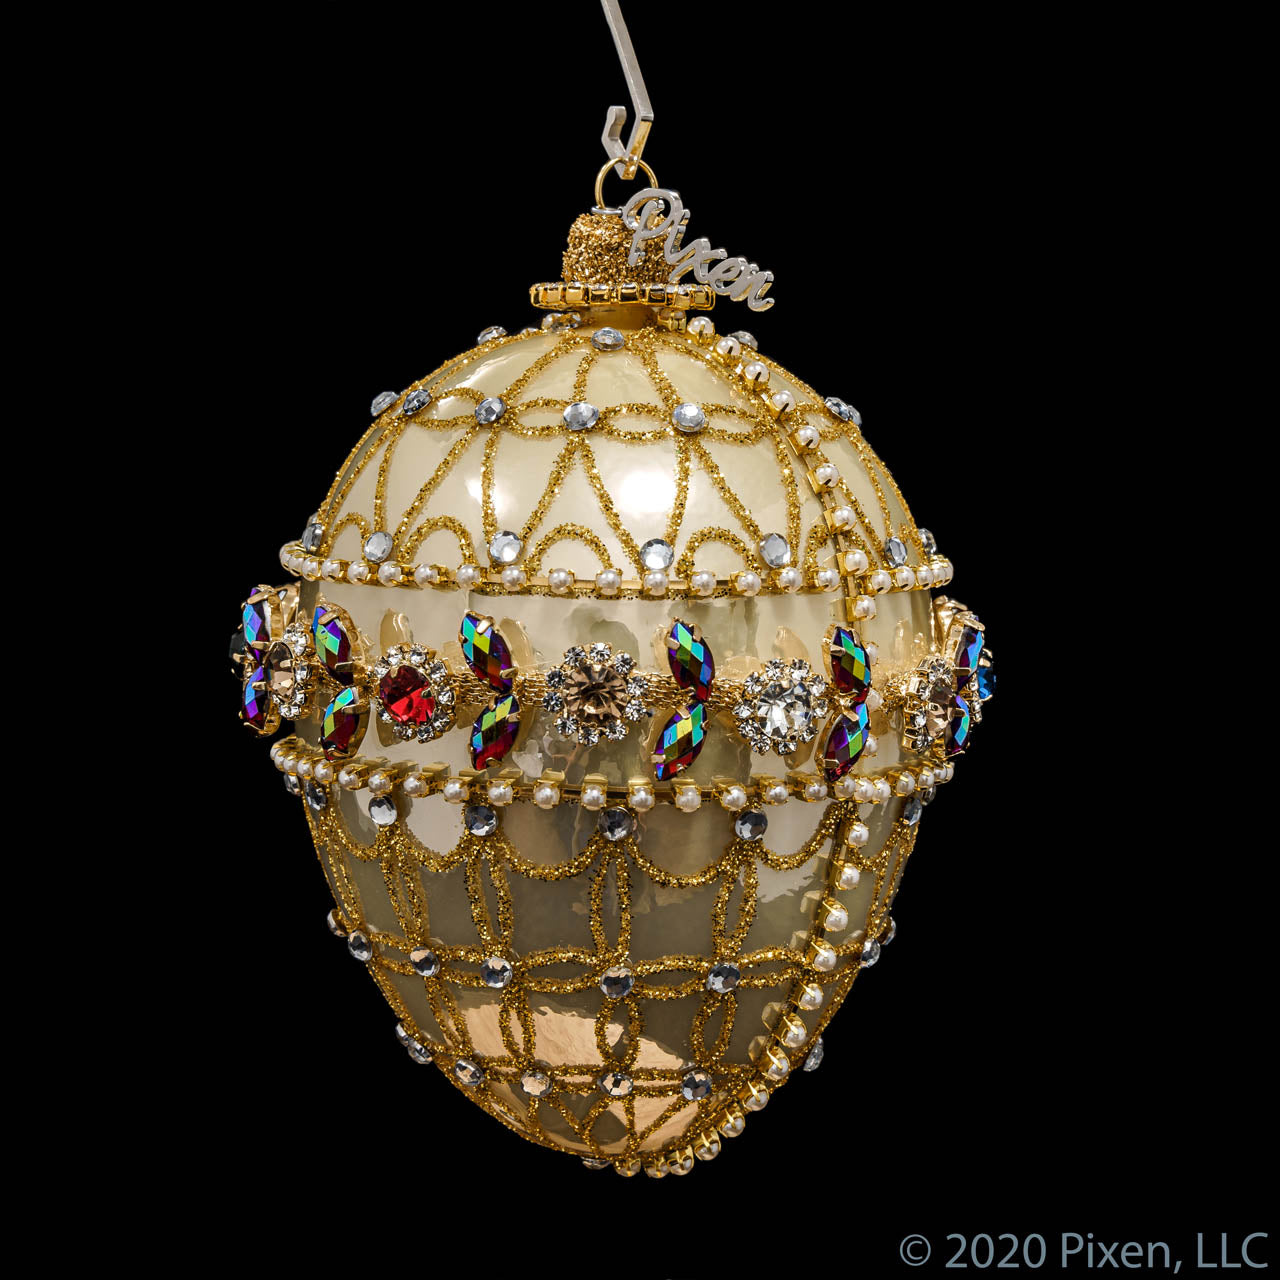 Reticulation Glass Christmas Ornament by Pixen